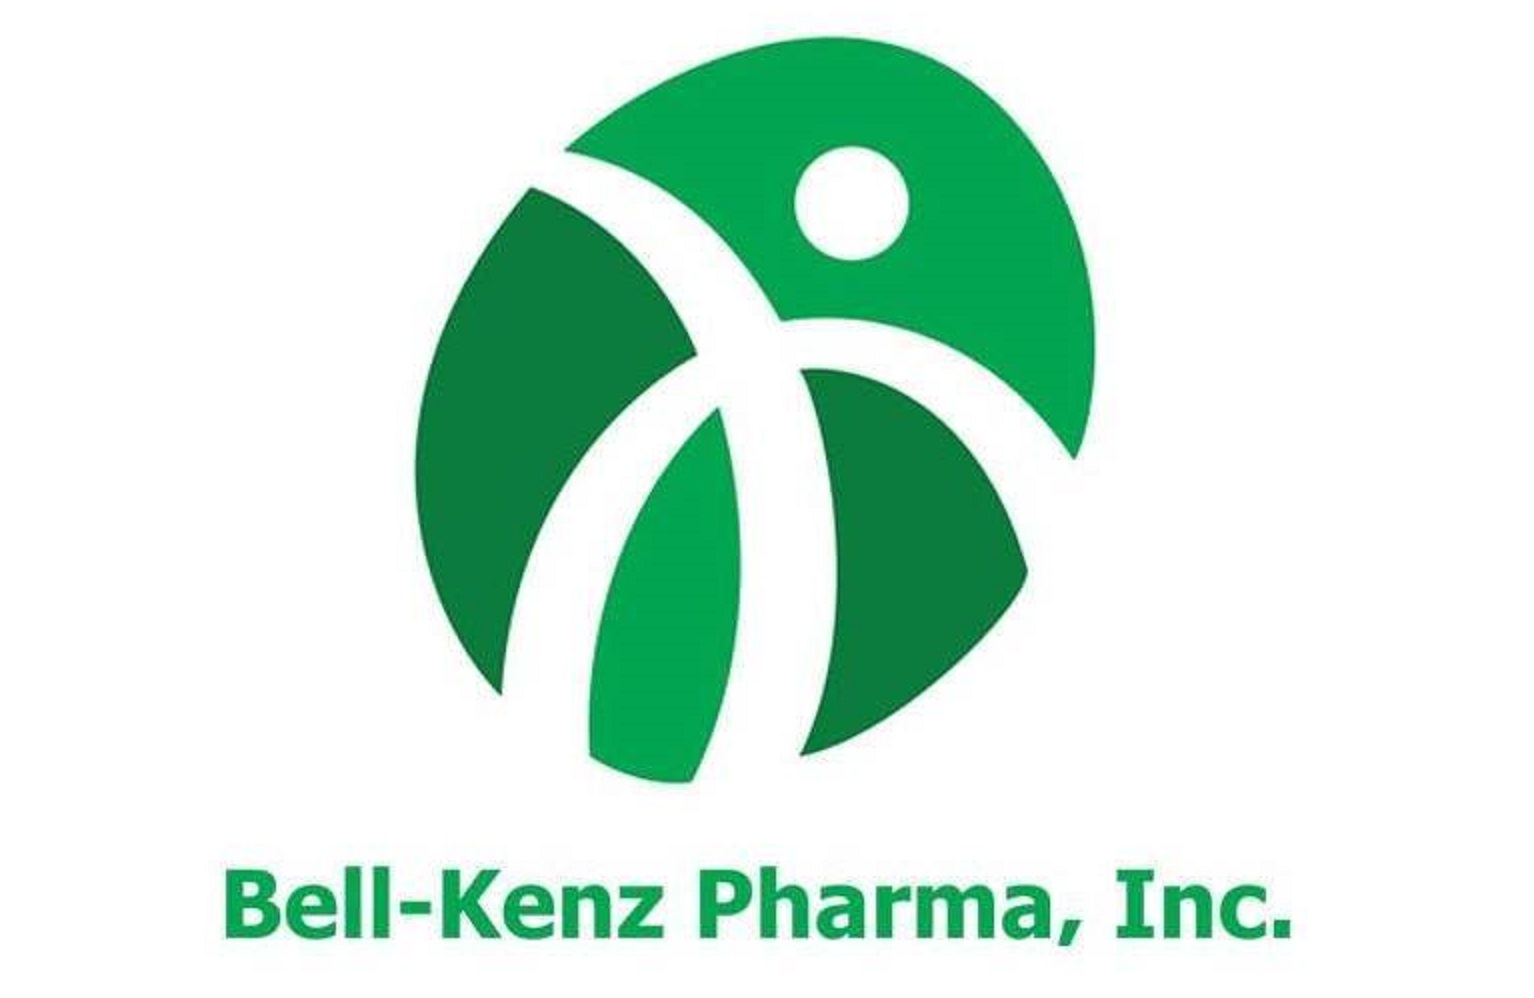 bell-kenz pharma inc. to file cyberlibel vs. individuals spreading 'malicious accusations'